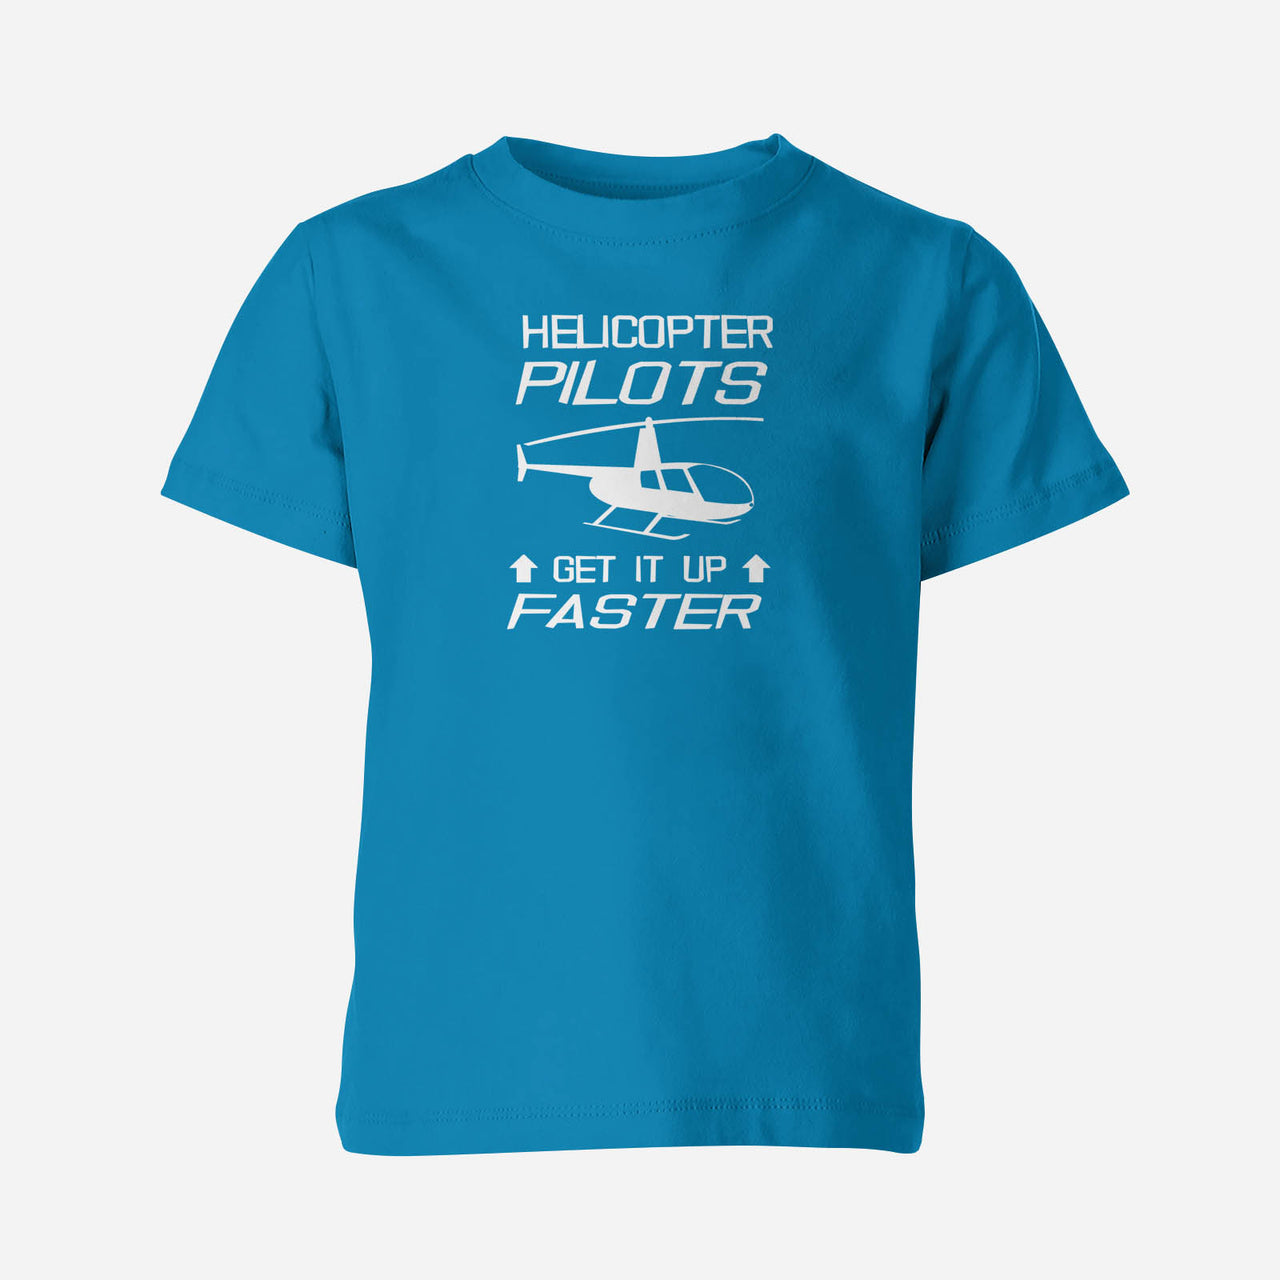 Helicopter Pilots Get It Up Faster Designed Children T-Shirts